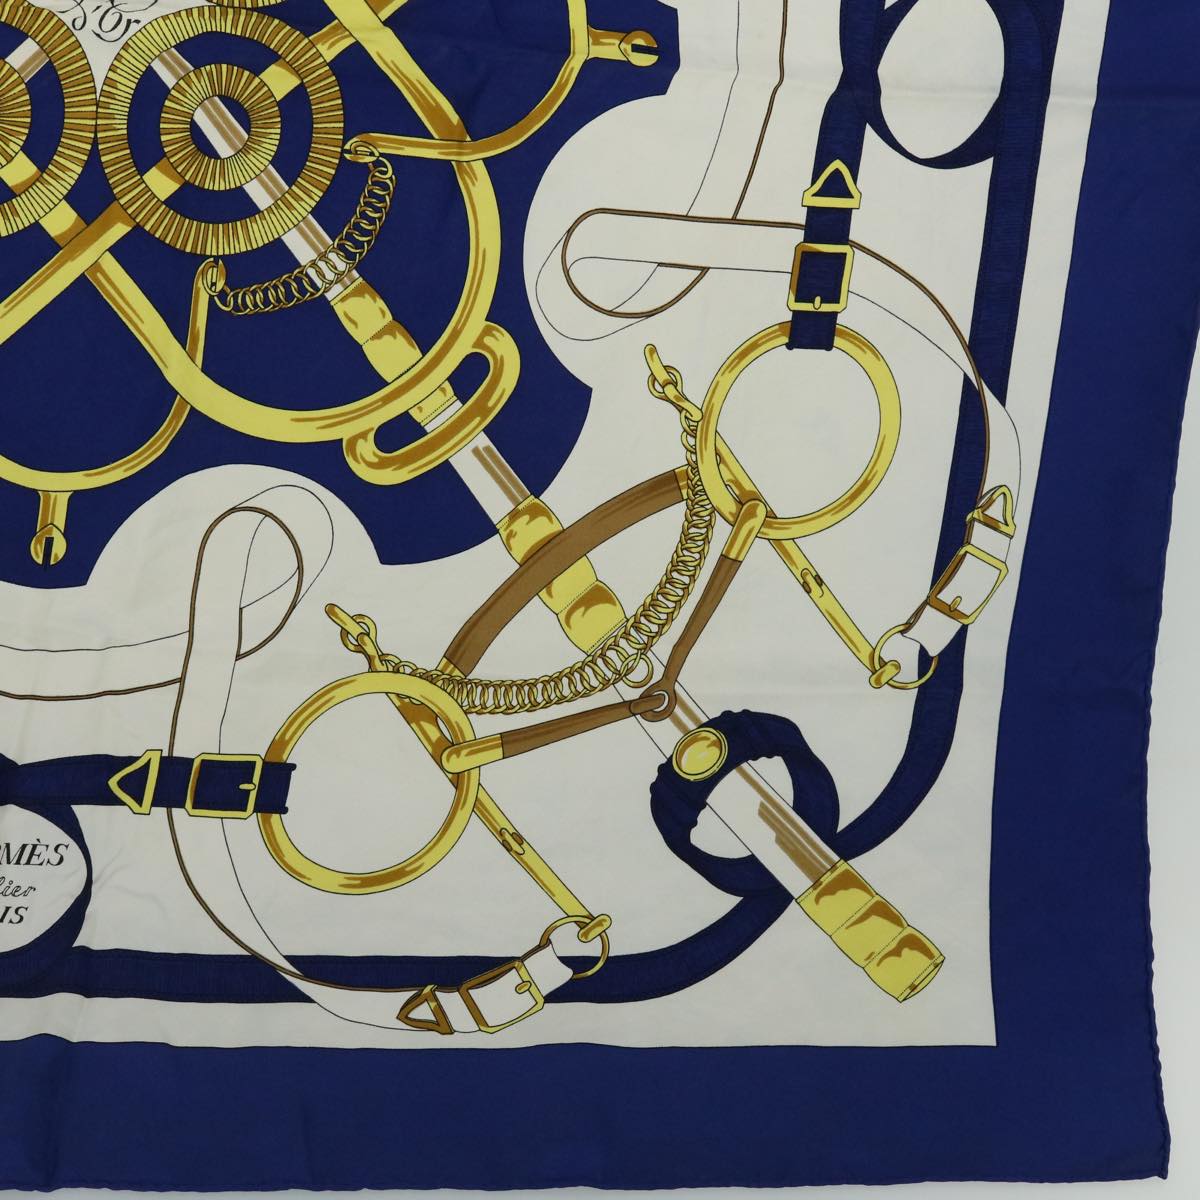 HERMES Carre 90 Fellier Eperon d’or Scarf Silk Blue White yellow Auth 52260